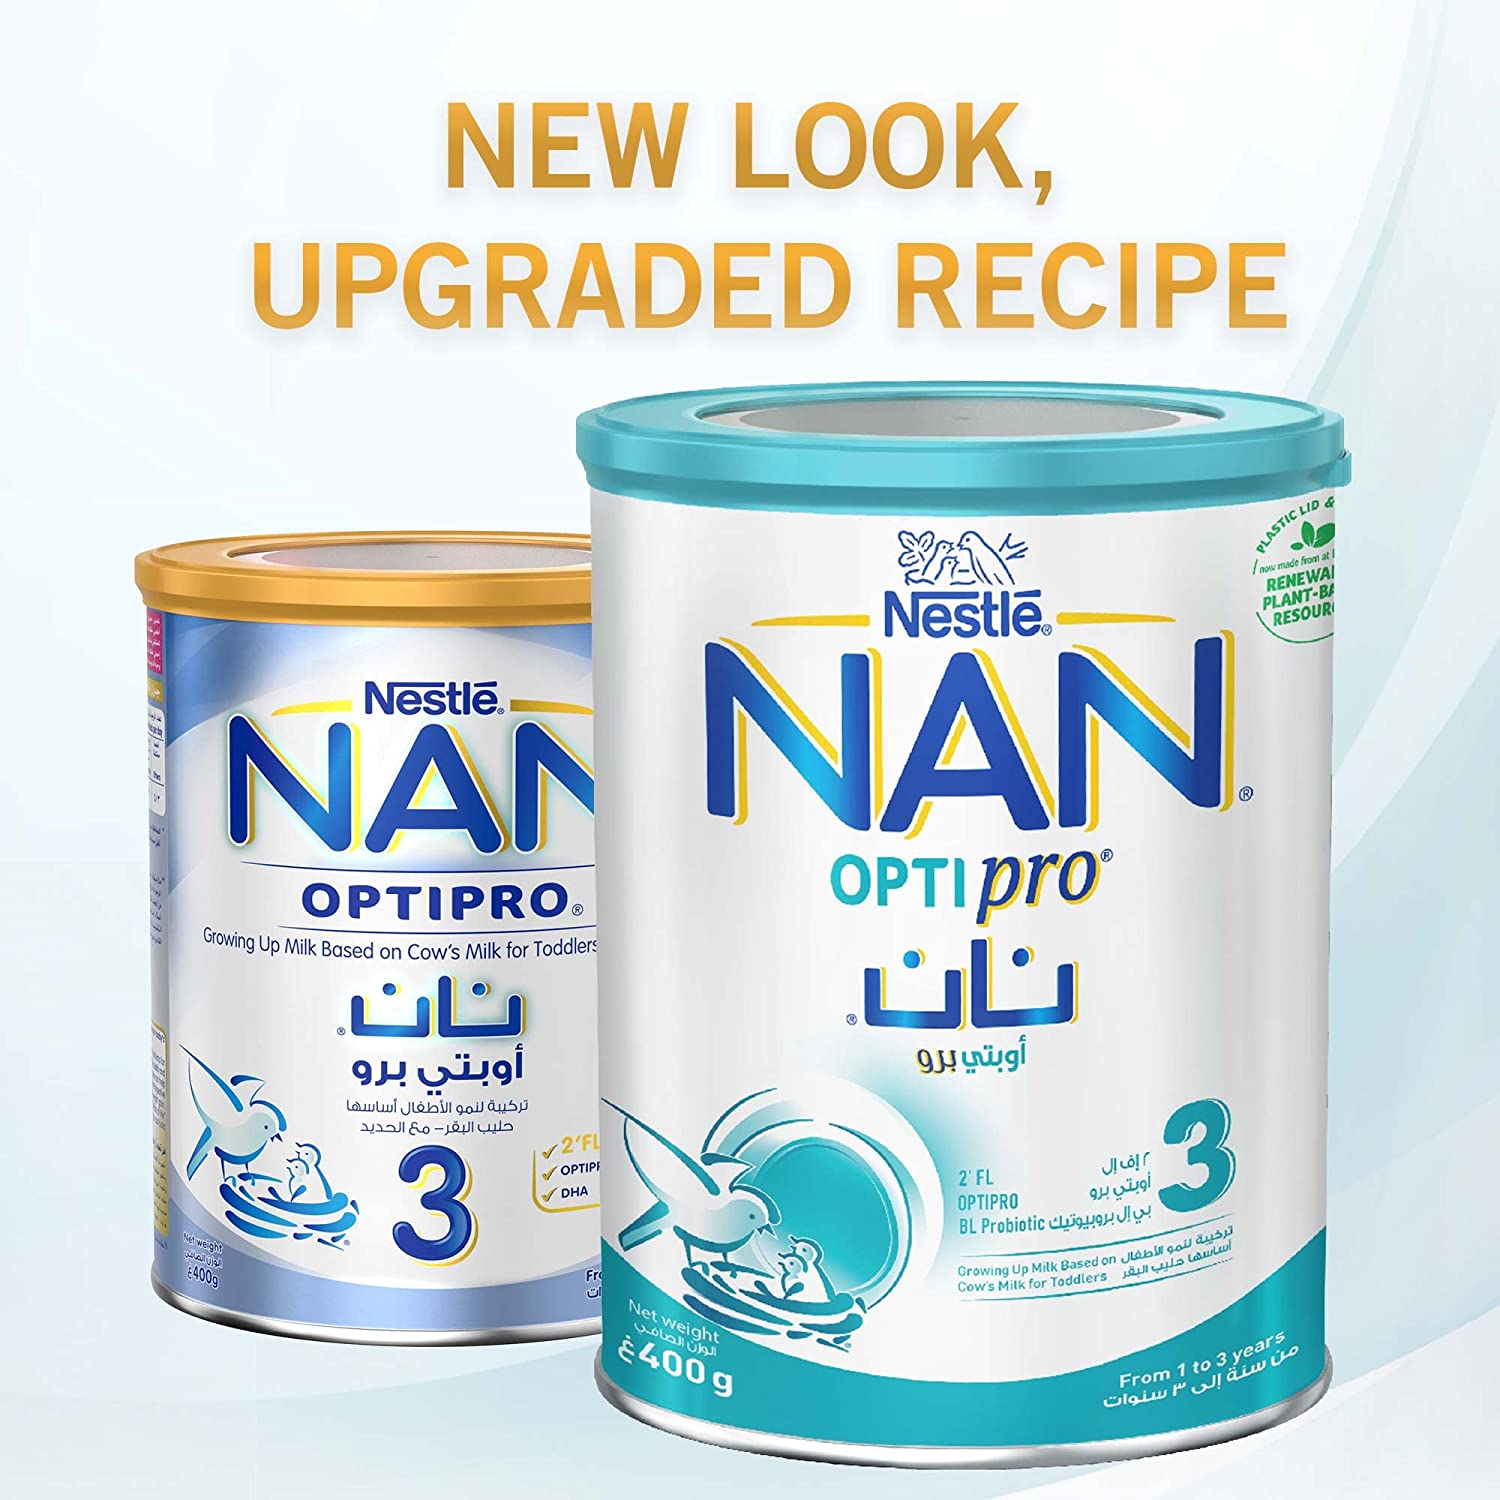 Nan Optipro 2 Infant Powdered Milk-6 Months 400g in Amuwo-Odofin - Baby &  Child Care, Unikconsumables Ventures